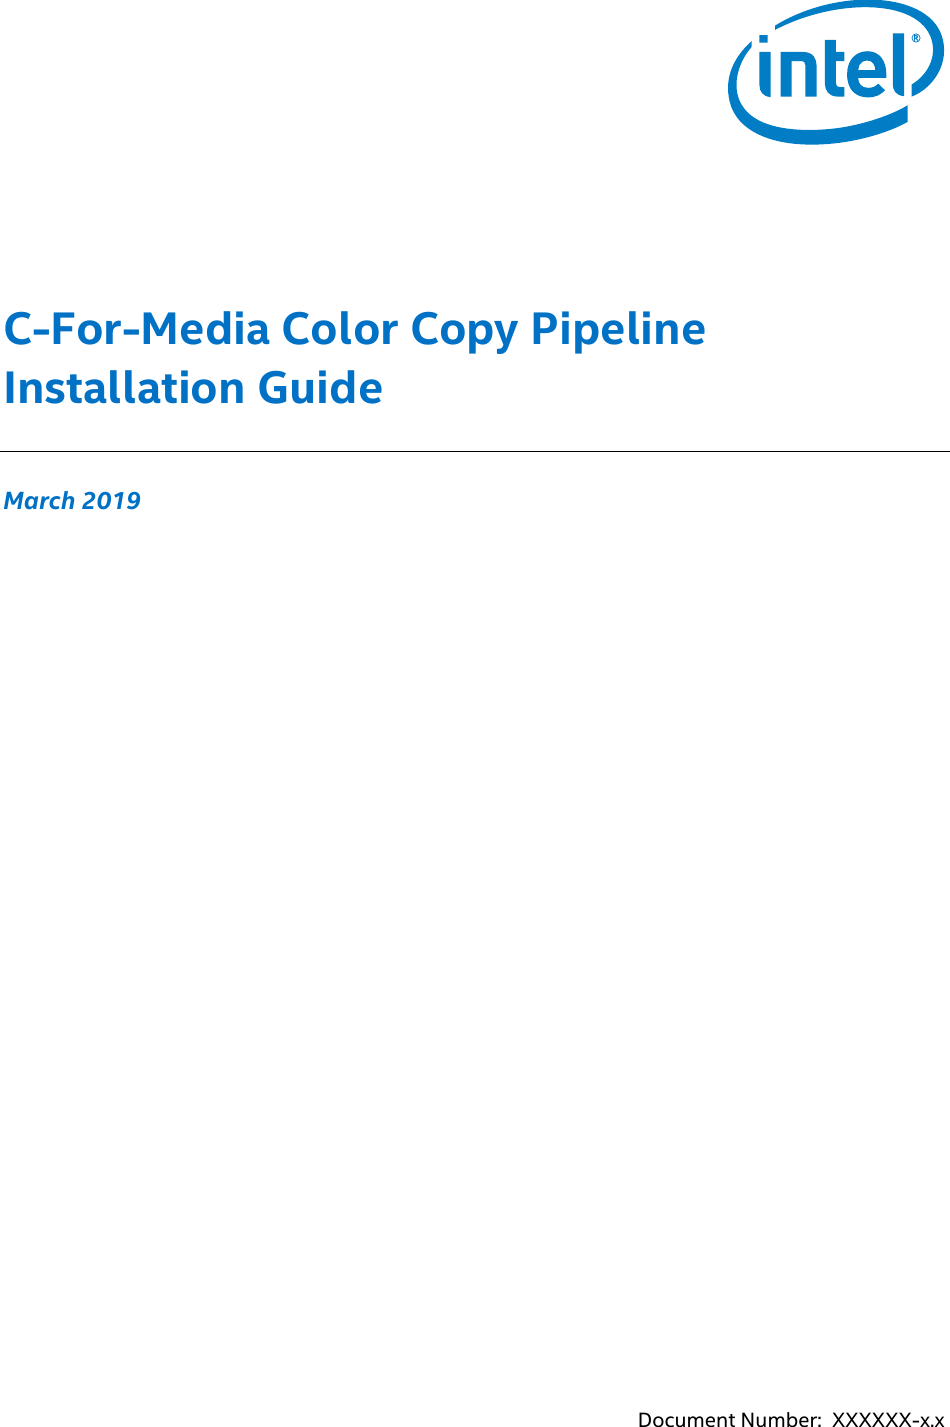 Page 1 of 10 - C-For-Media Installation Guide